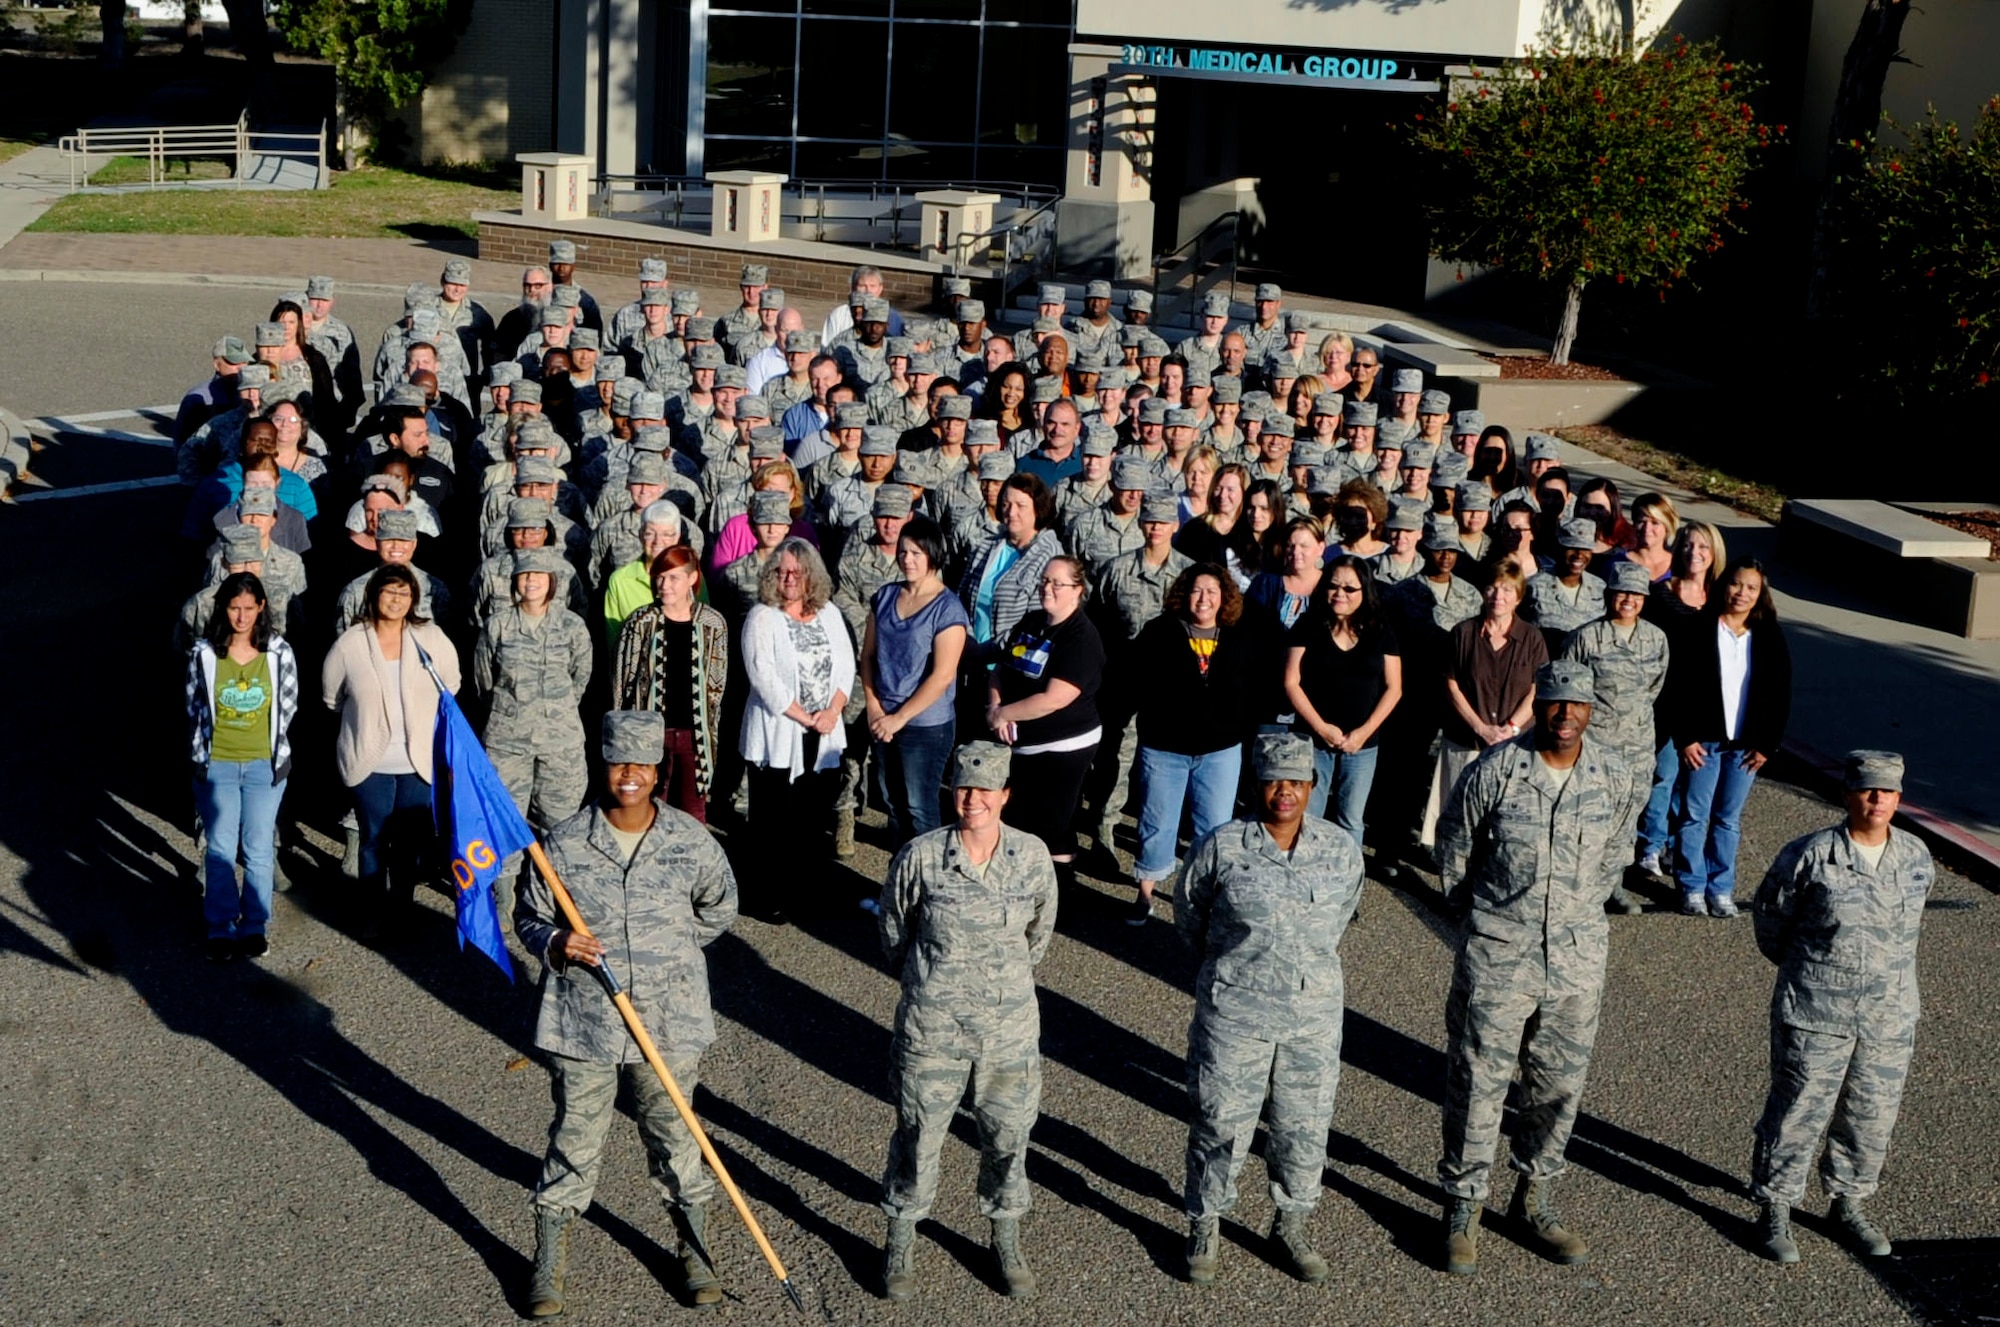 Members of the 30th Medical Group pose for a photo, Oct. 29, 2015, Vandenberg Air Force Base, Calif. The 30th Medical Group was recently recognized for its outstanding service, both individually and as a team, winning multiple Major Command-level Medical Service Awards. (U.S. Air Force photo by Senior Airman Shane Phipps/Released)